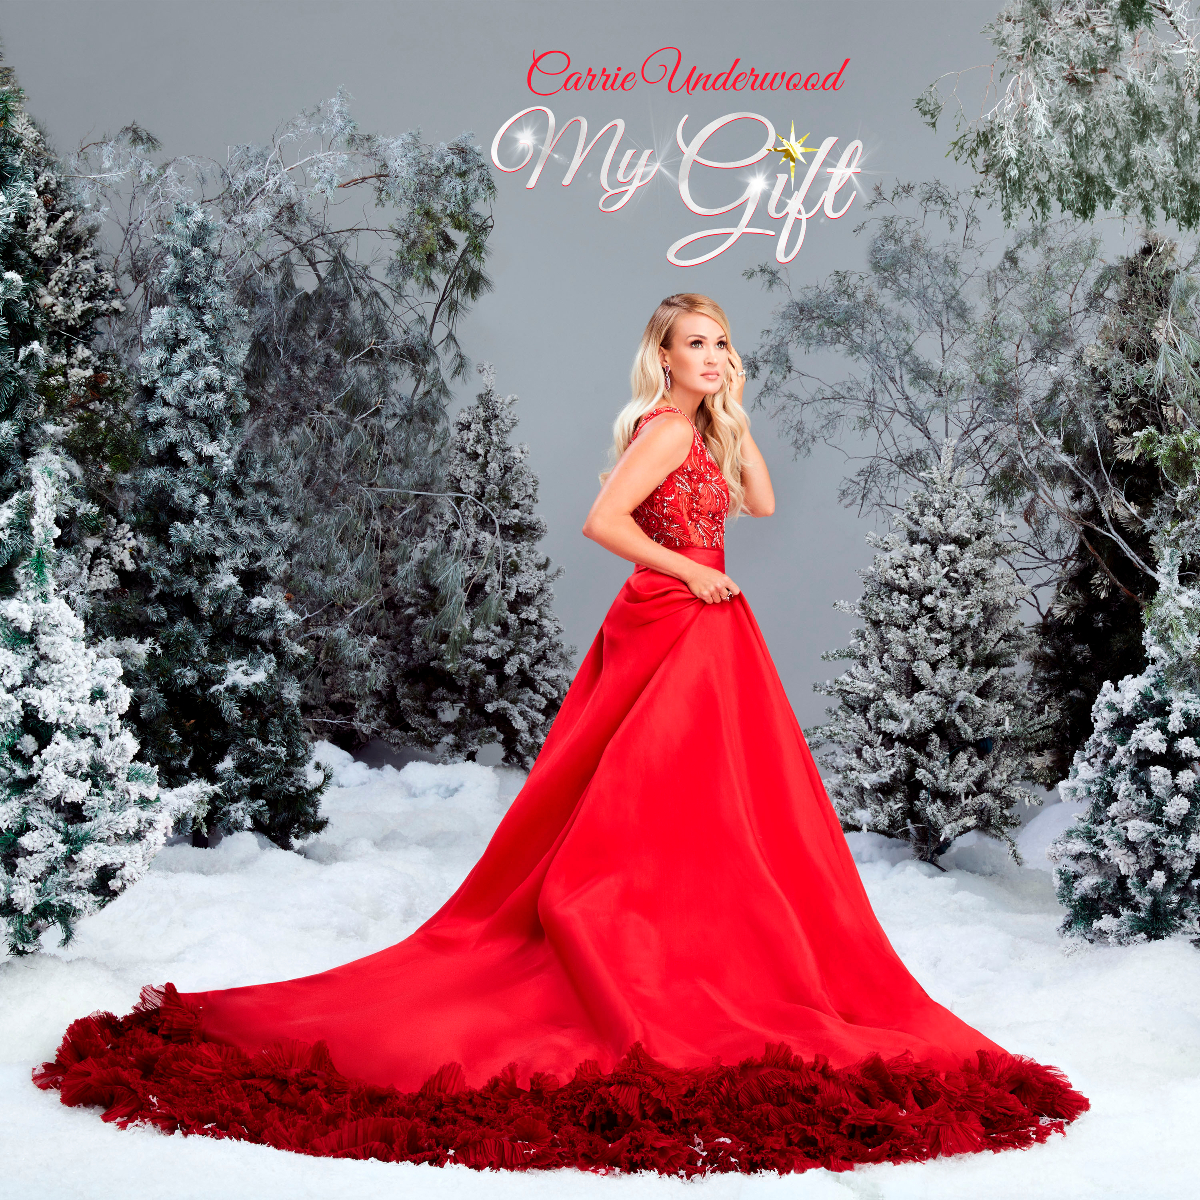 Carrie Underwood Will Feature Her 5-year-old Son On Her Upcoming Christmas Album